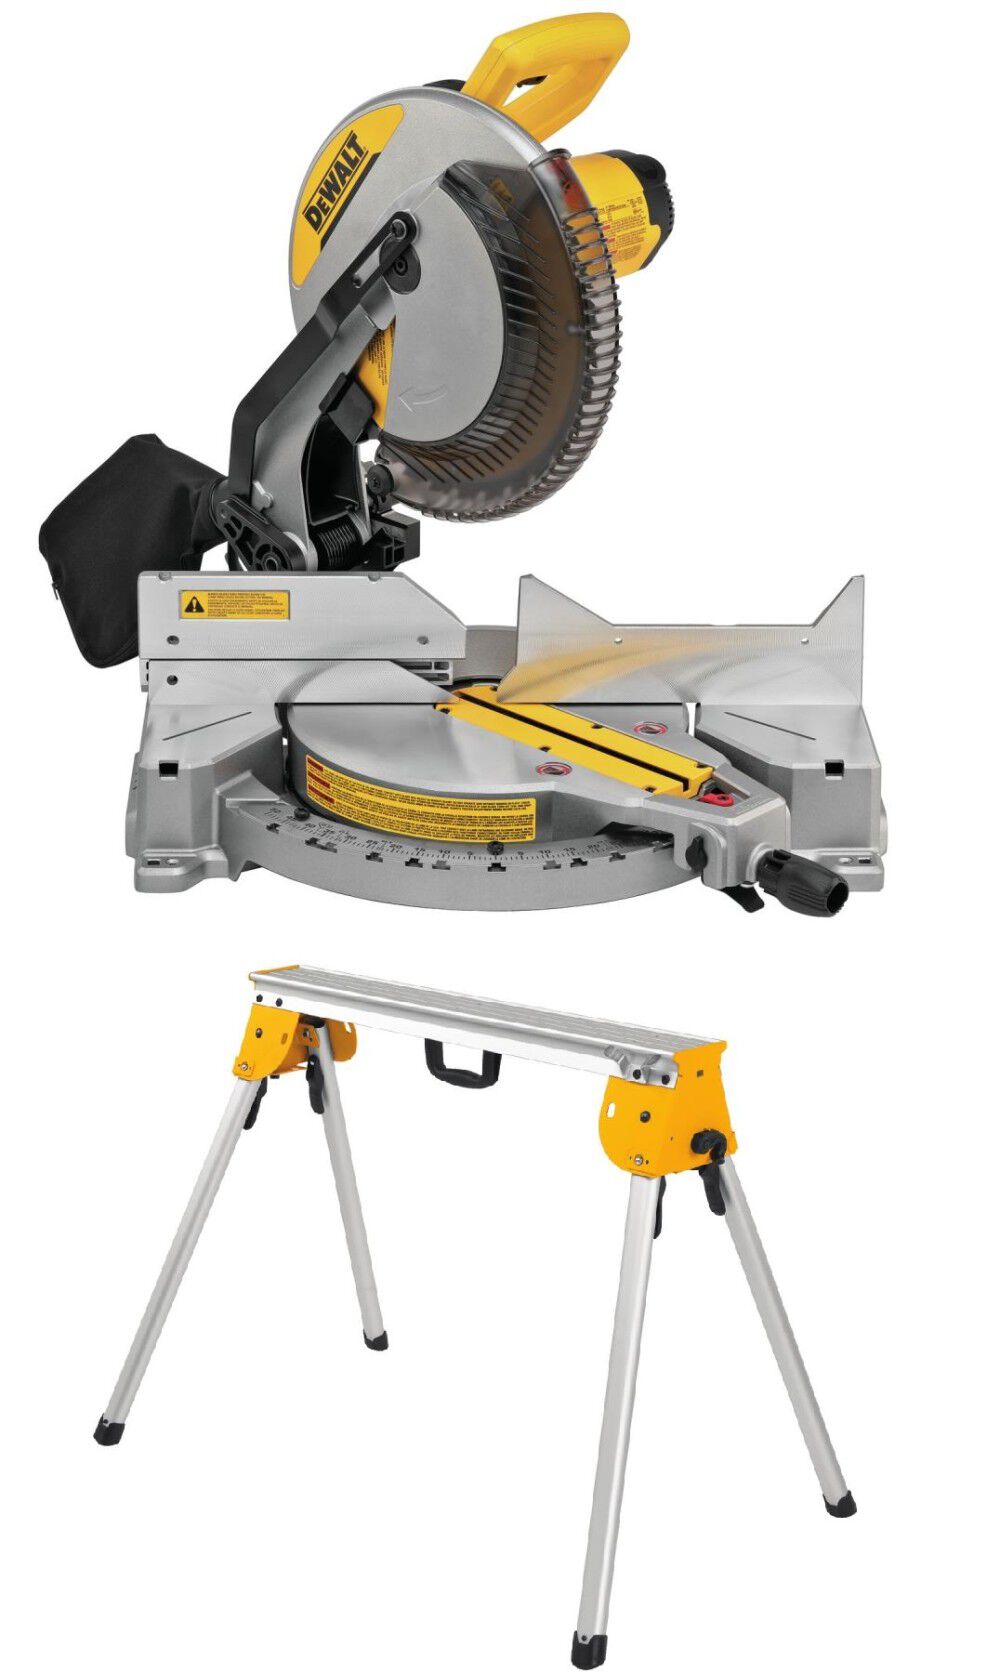 DEWALT 12-in 15-Amp Single Bevel Compound Miter Saw and Heavy Duty Work  Stand with Miter Saw Mounting Brackets DWS715DWX725B from DEWALT Acme  Tools